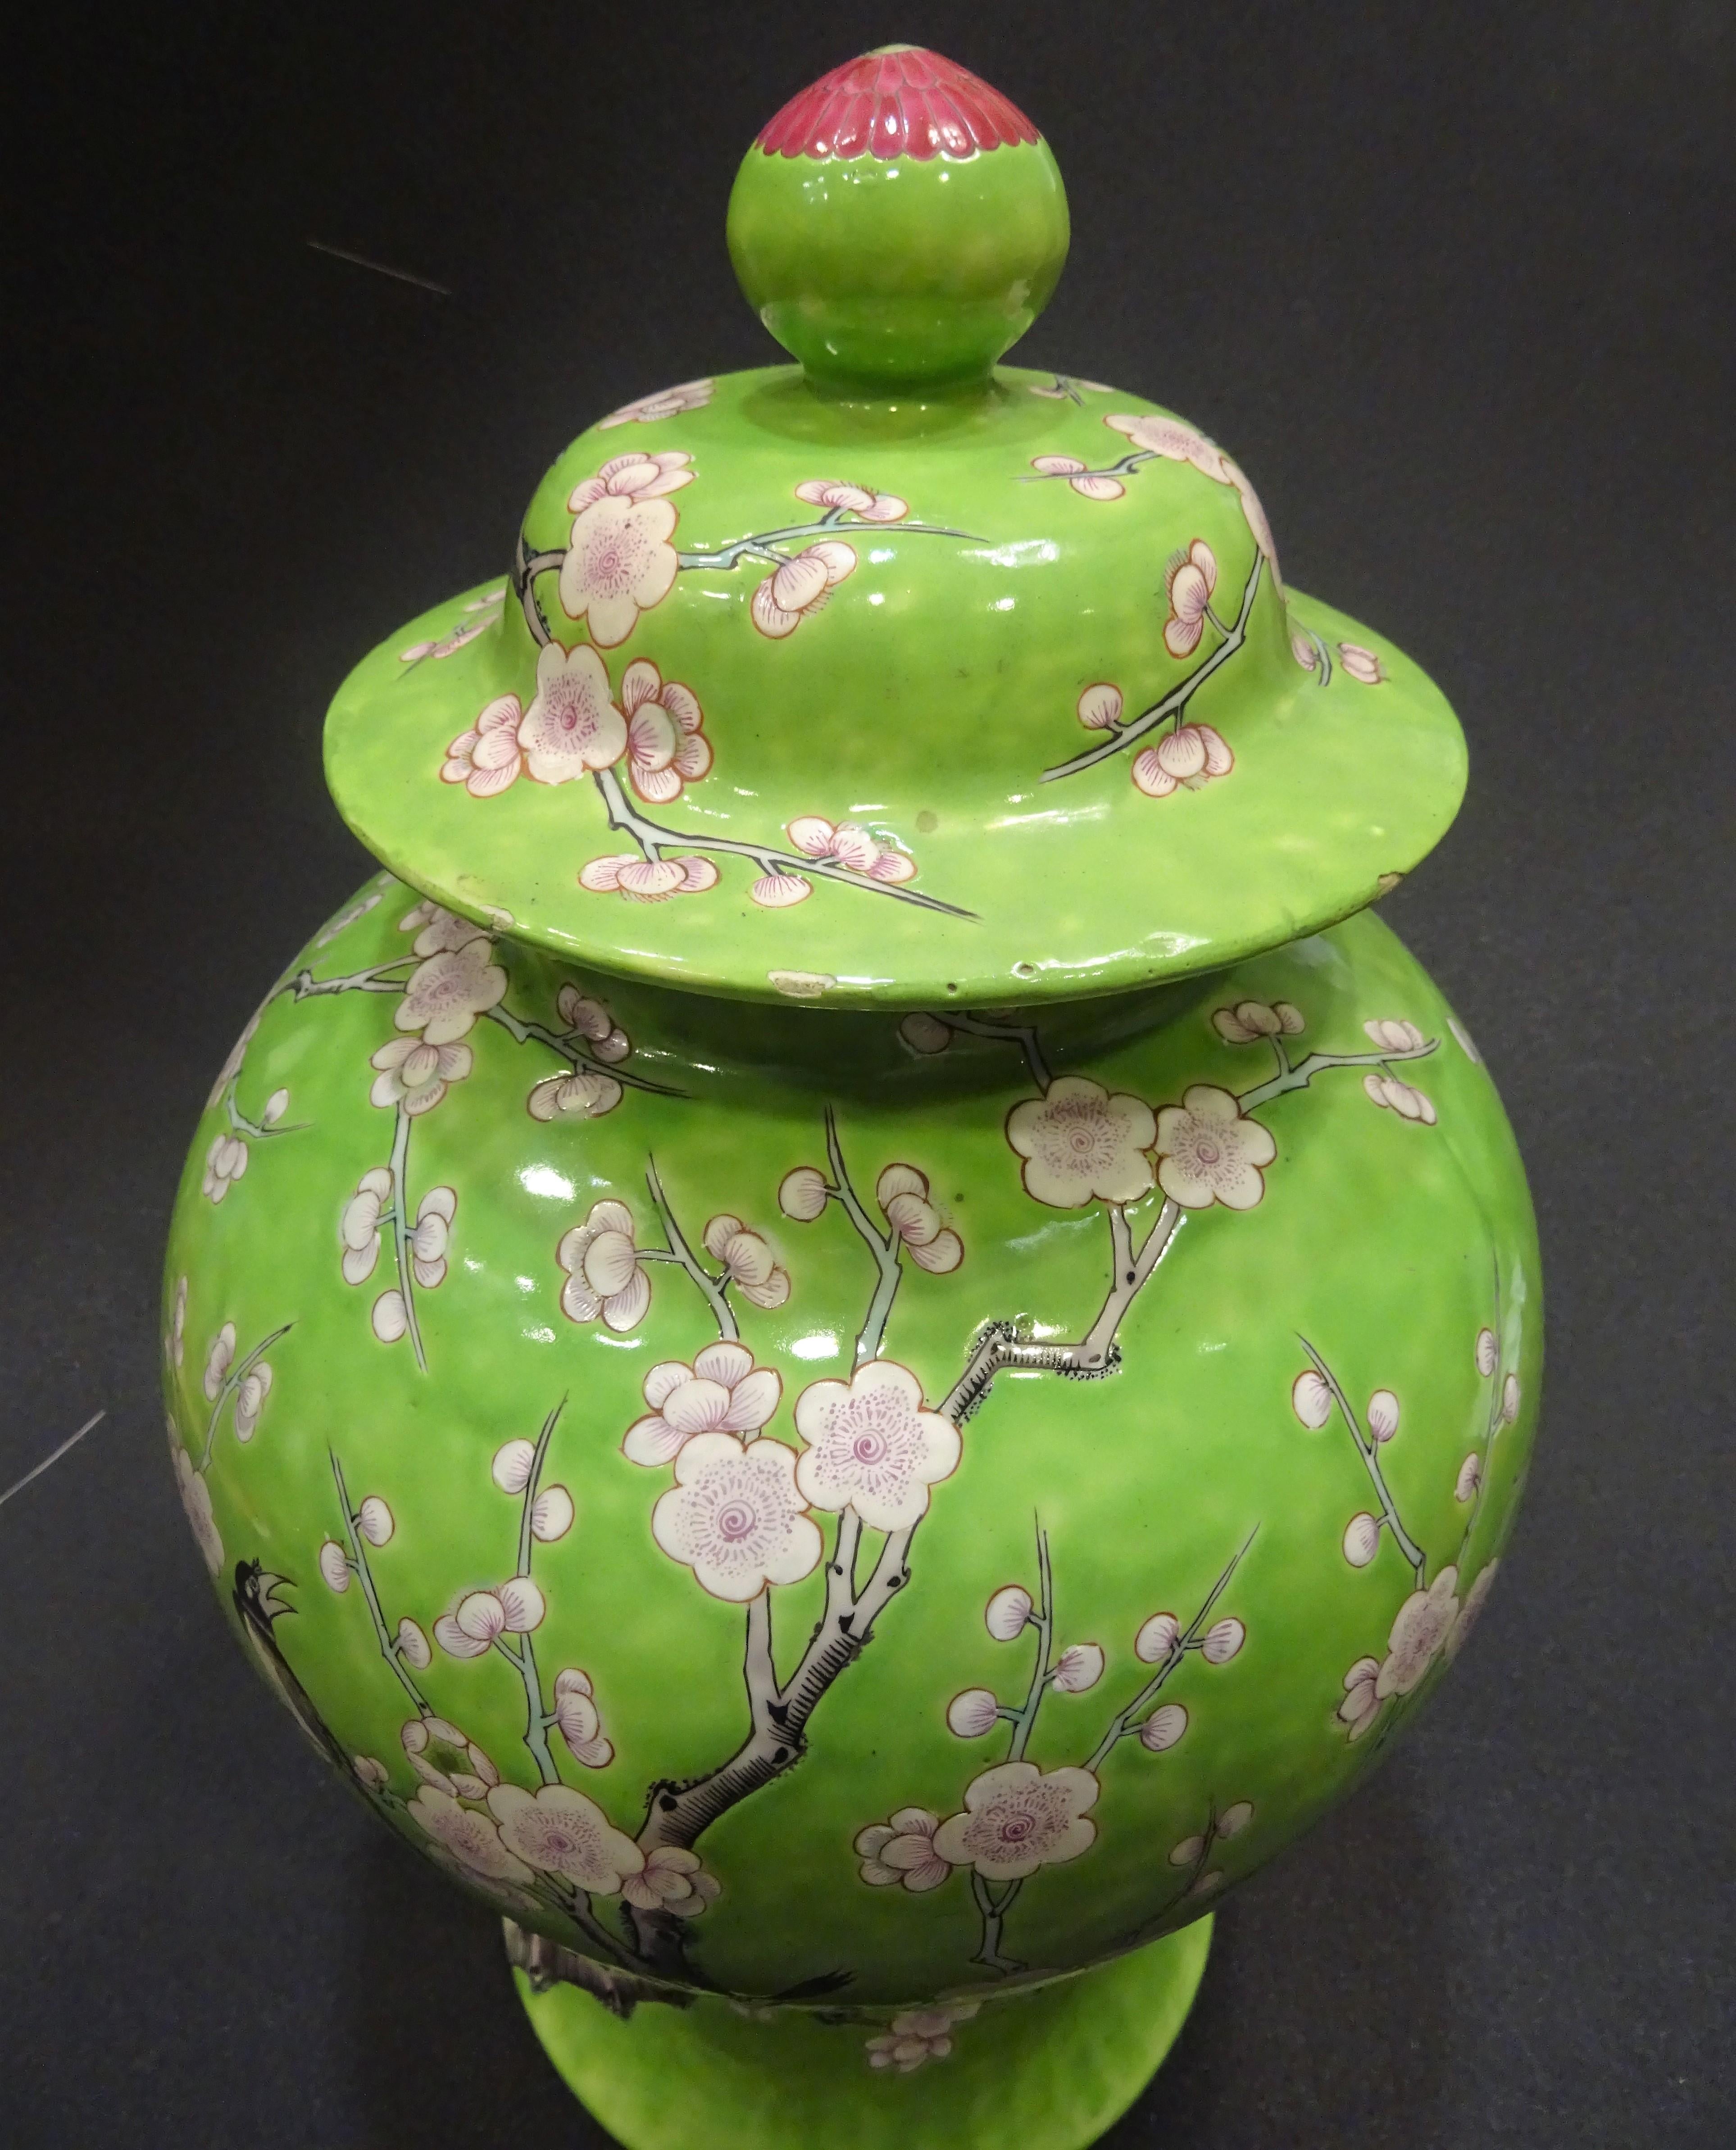 Stunning hand painted Chinese Porcelain lid vase. Guang-Xu period, (1875-1908), green family, with makes at the base. Hand painted in a beautiful light green with almonds tree and crows in black and white color, the lids ends with a beautiful pink